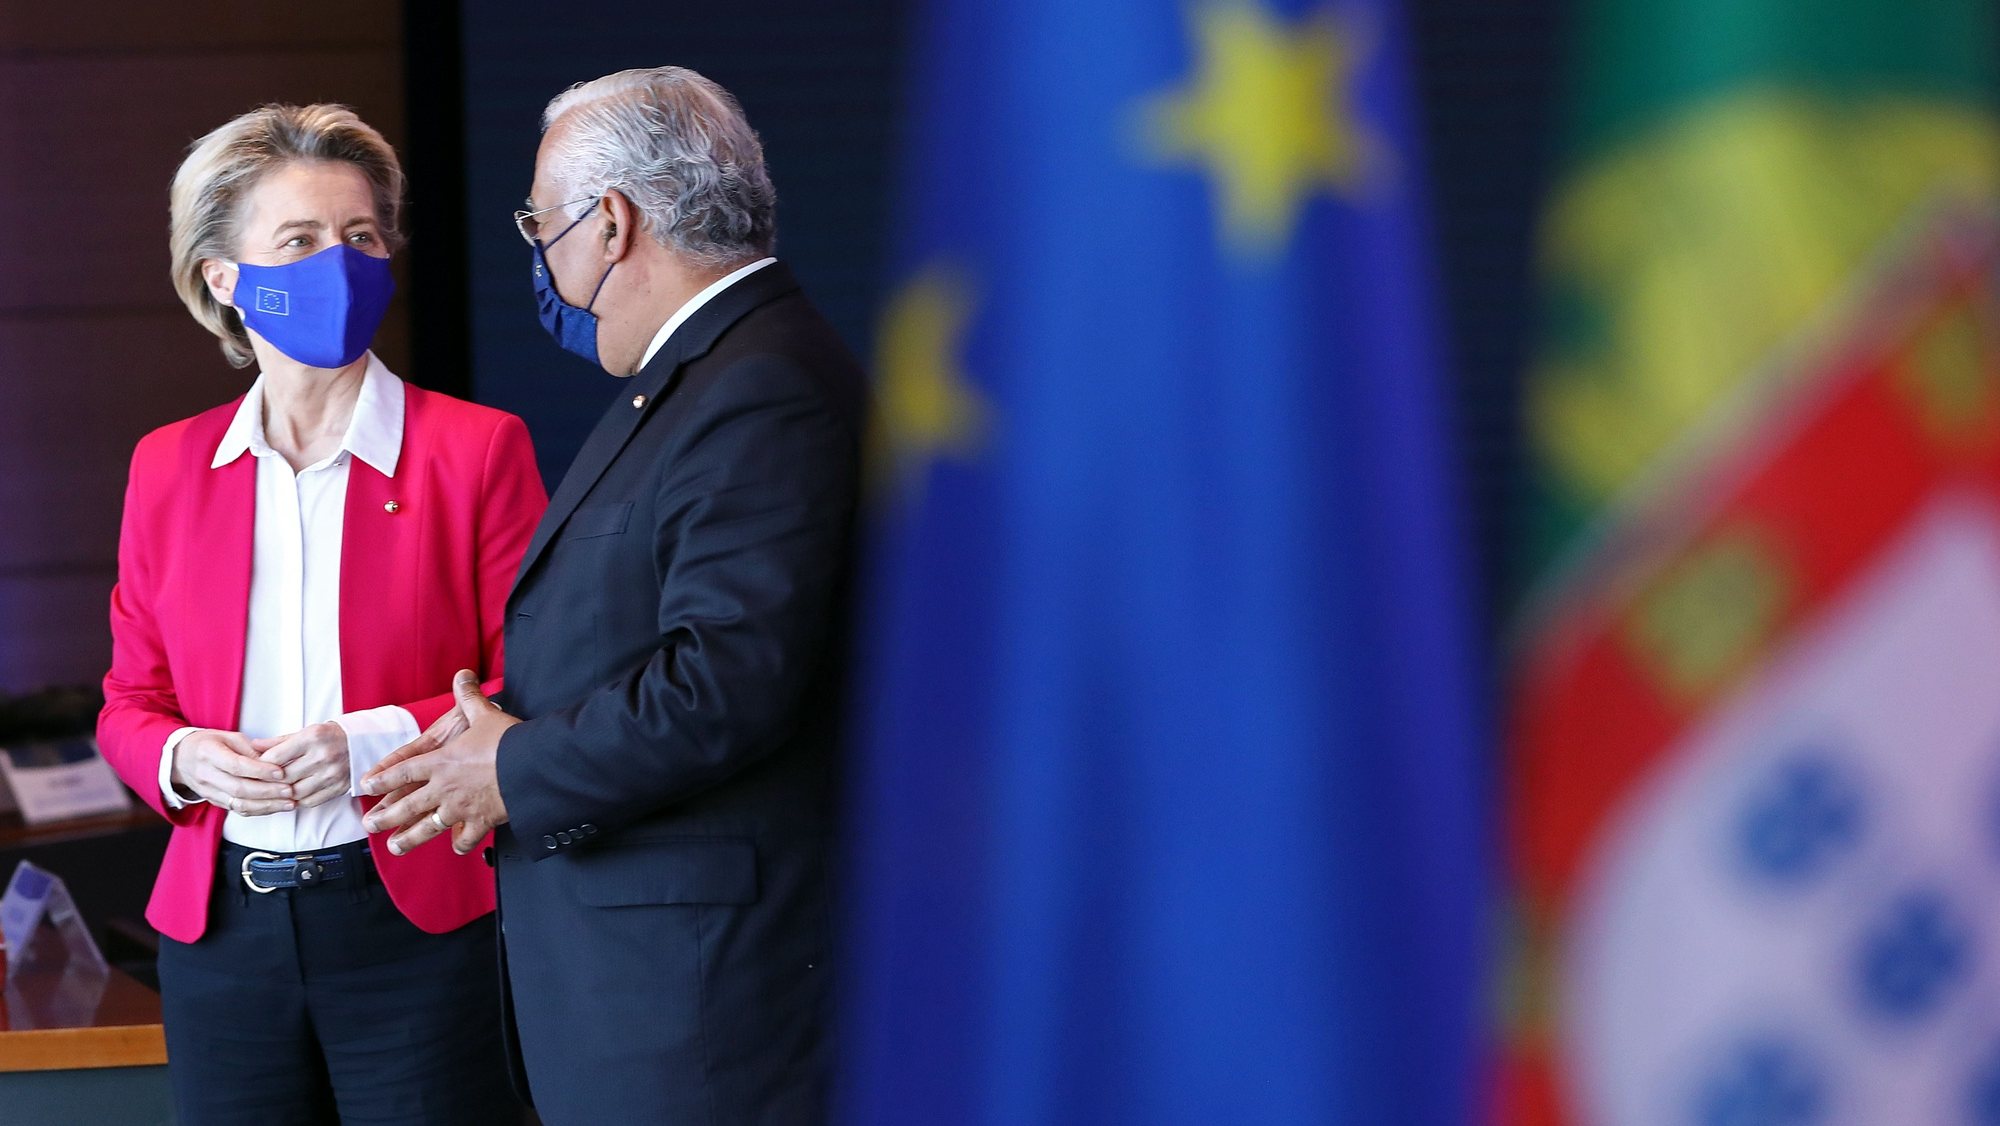 European Commission President Ursula Von Der Leyen (L) speaks with Portuguese Prime Minister Antonio Costa (R) at the beginning of a meeting on the programme and the priorities of the Portuguese Presidency of the Council of the European Union (PPUE) in Lisbon, Portugal, 15 January 2021. During the first half of this year, Portugal will have its fourth presidency after 1992, 2000, and 2007. ANTONIO PEDRO SANTOS/LUSA